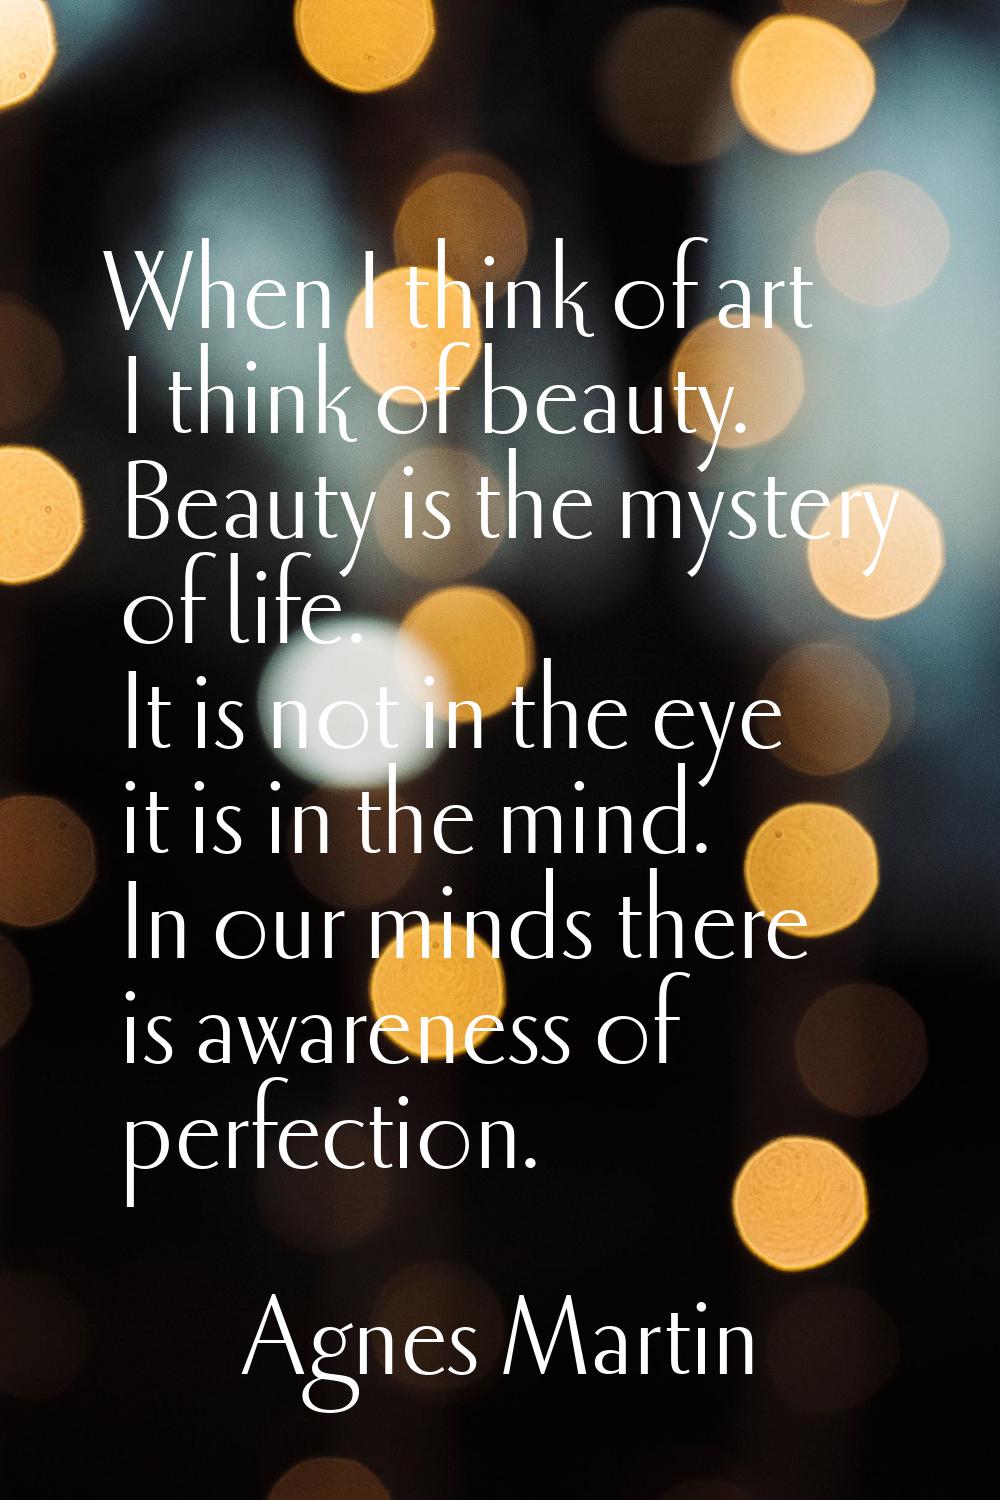 When I think of art I think of beauty. Beauty is the mystery of life. It is not in the eye it is in